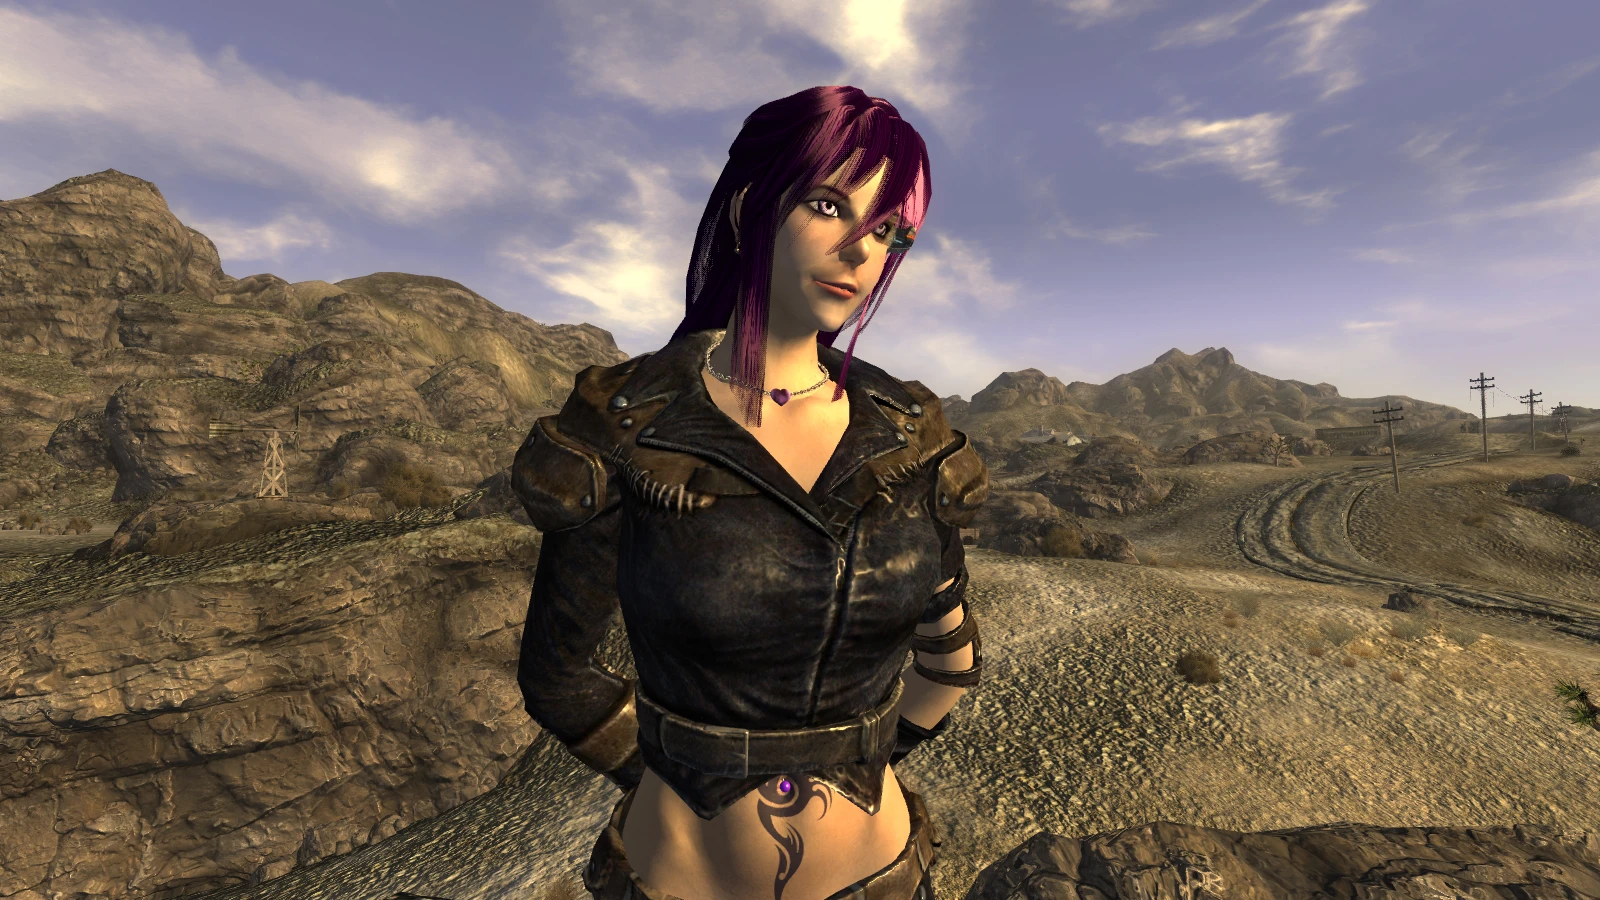 Older Cecilia 1 at Fallout New Vegas mods and community. www.nexusmods.com....